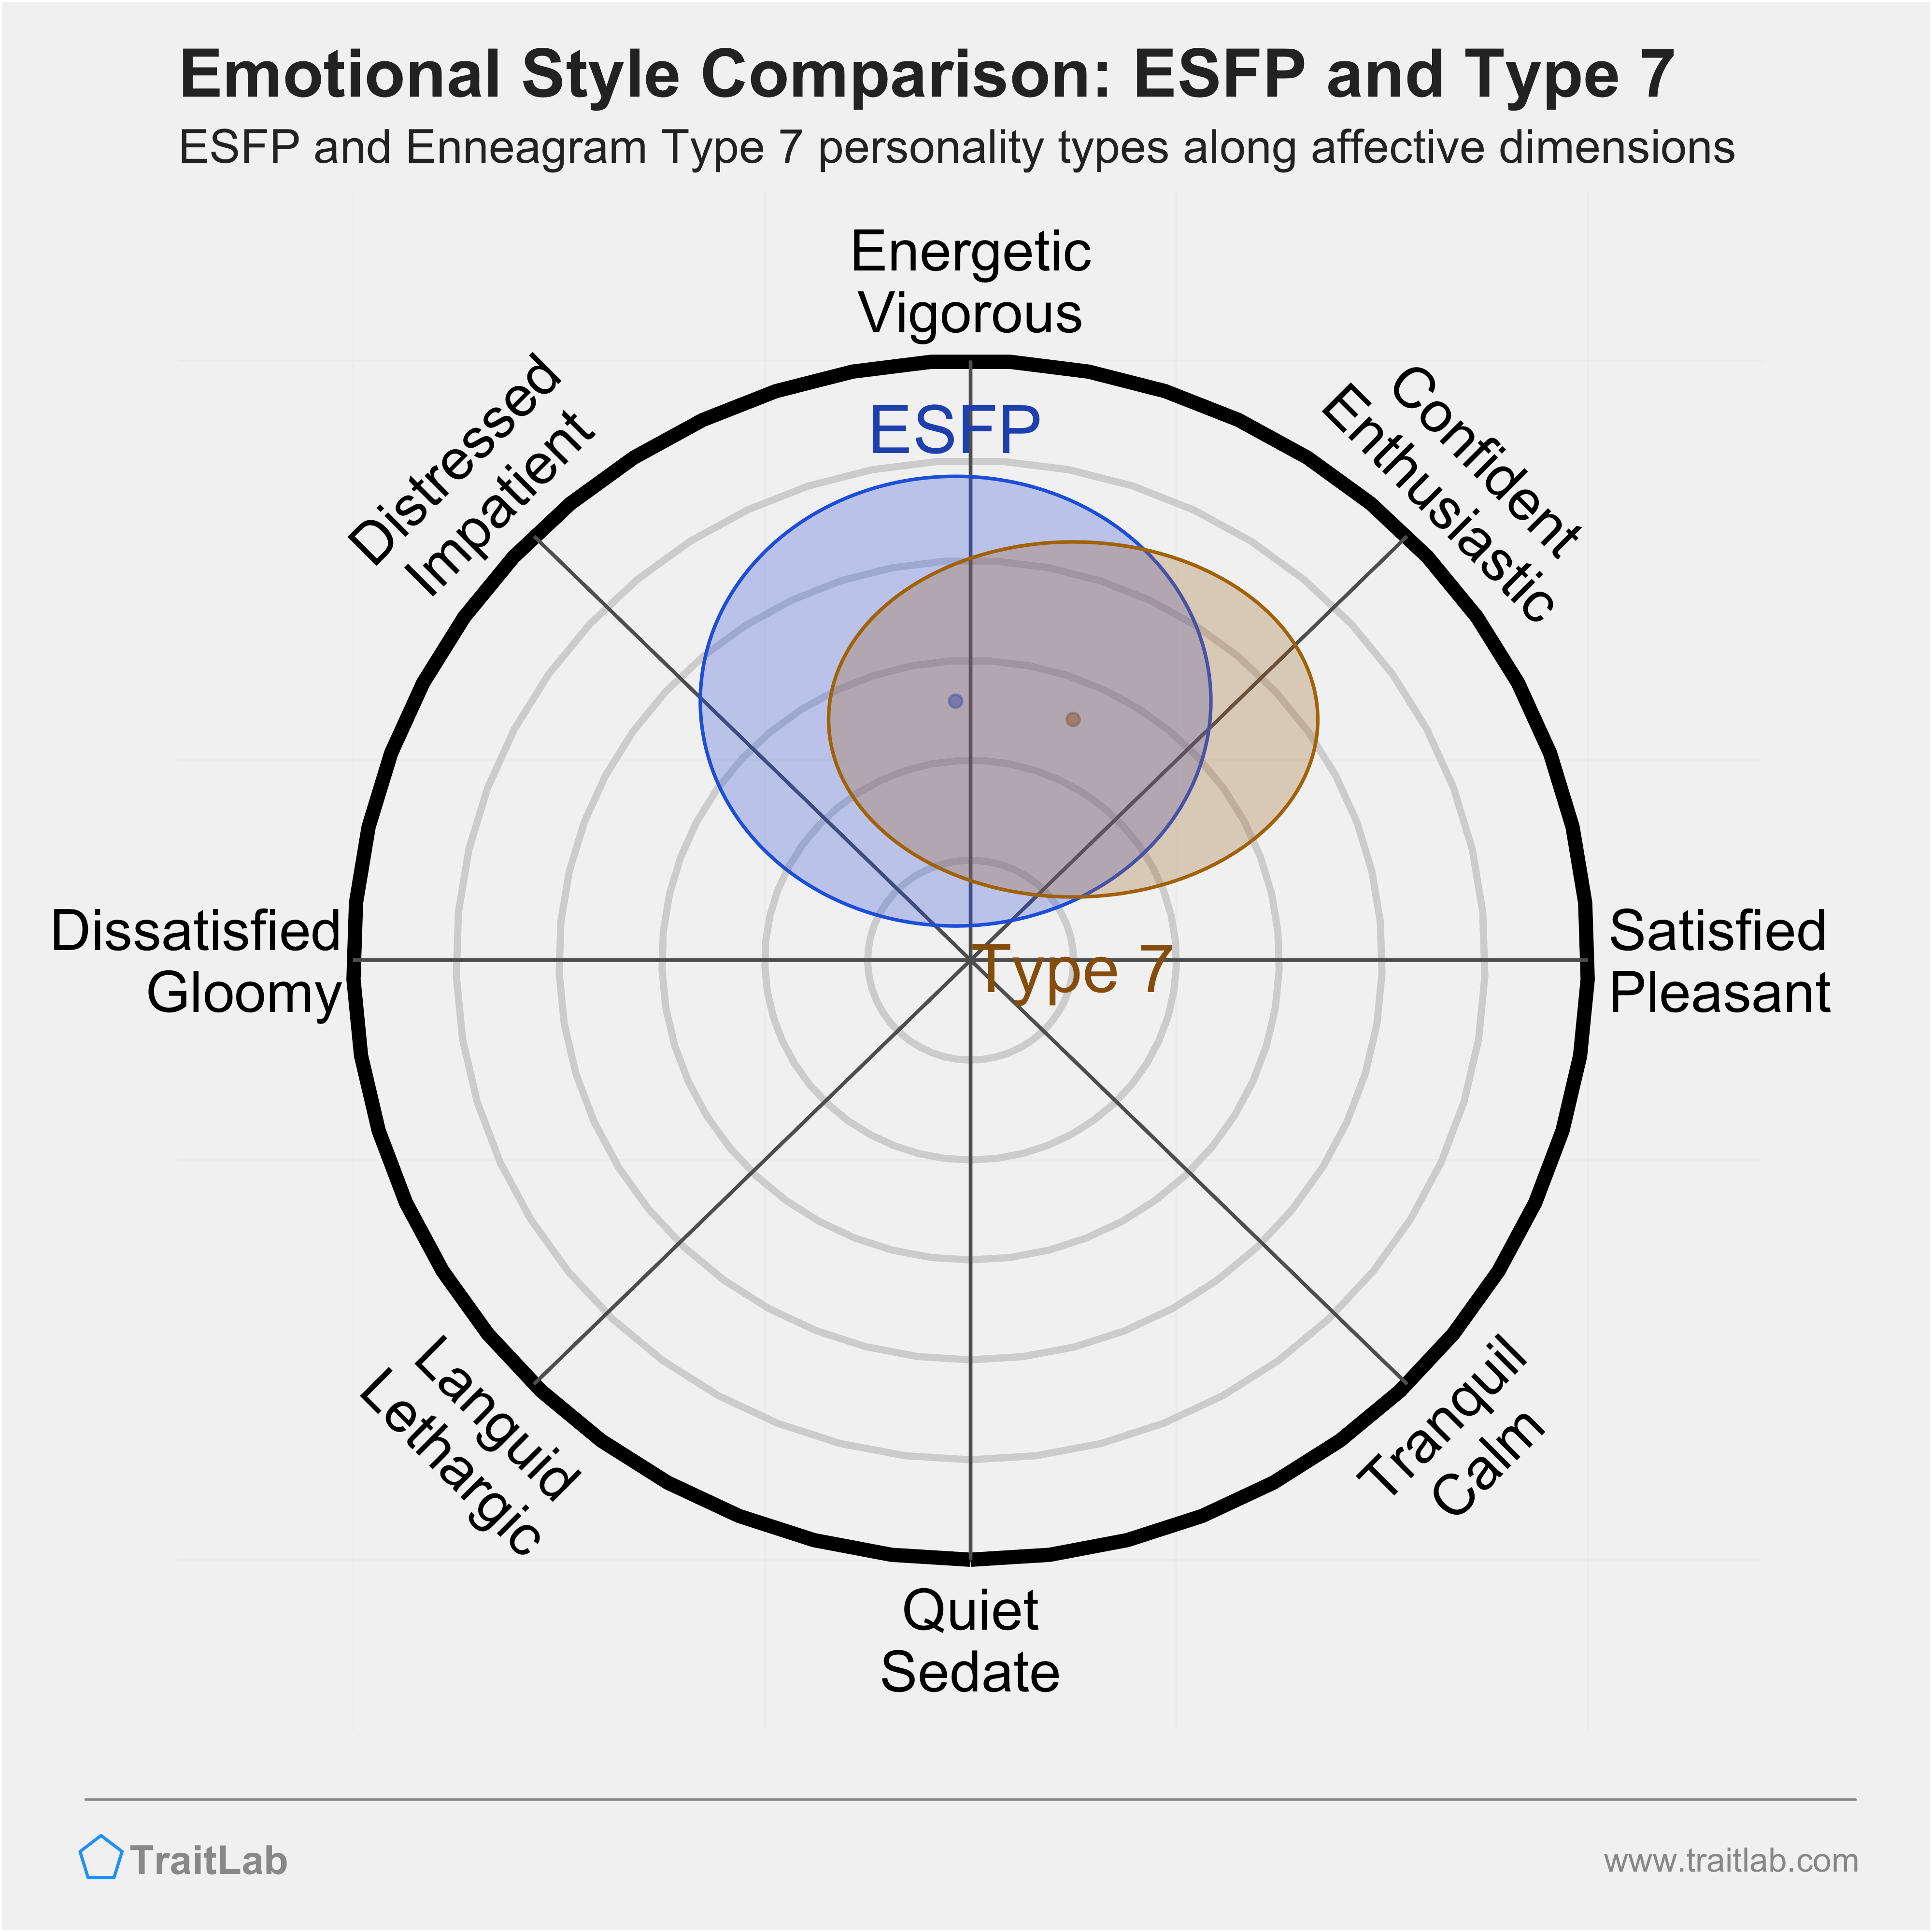 ESFP and Type 7 comparison across emotional (affective) dimensions